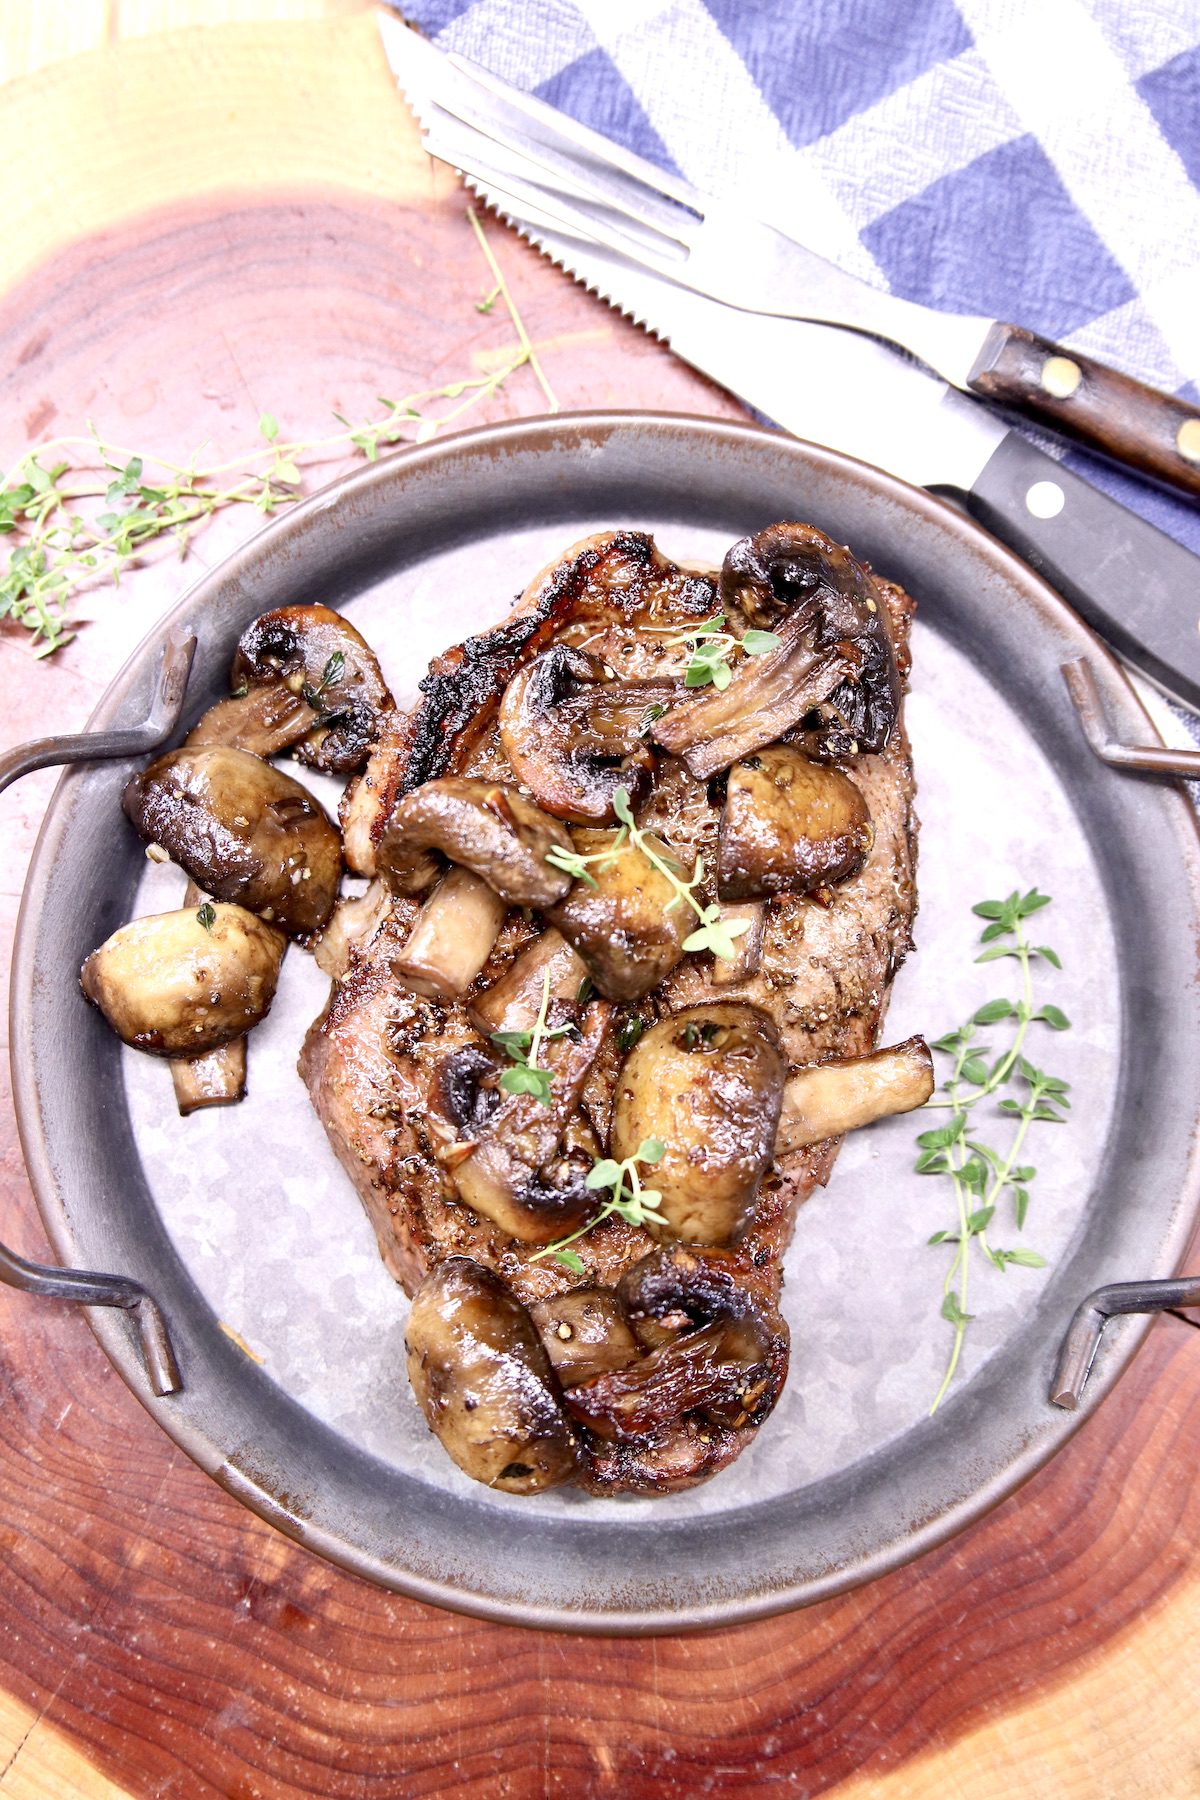 Grilled steak topped with mushrooms on a plate